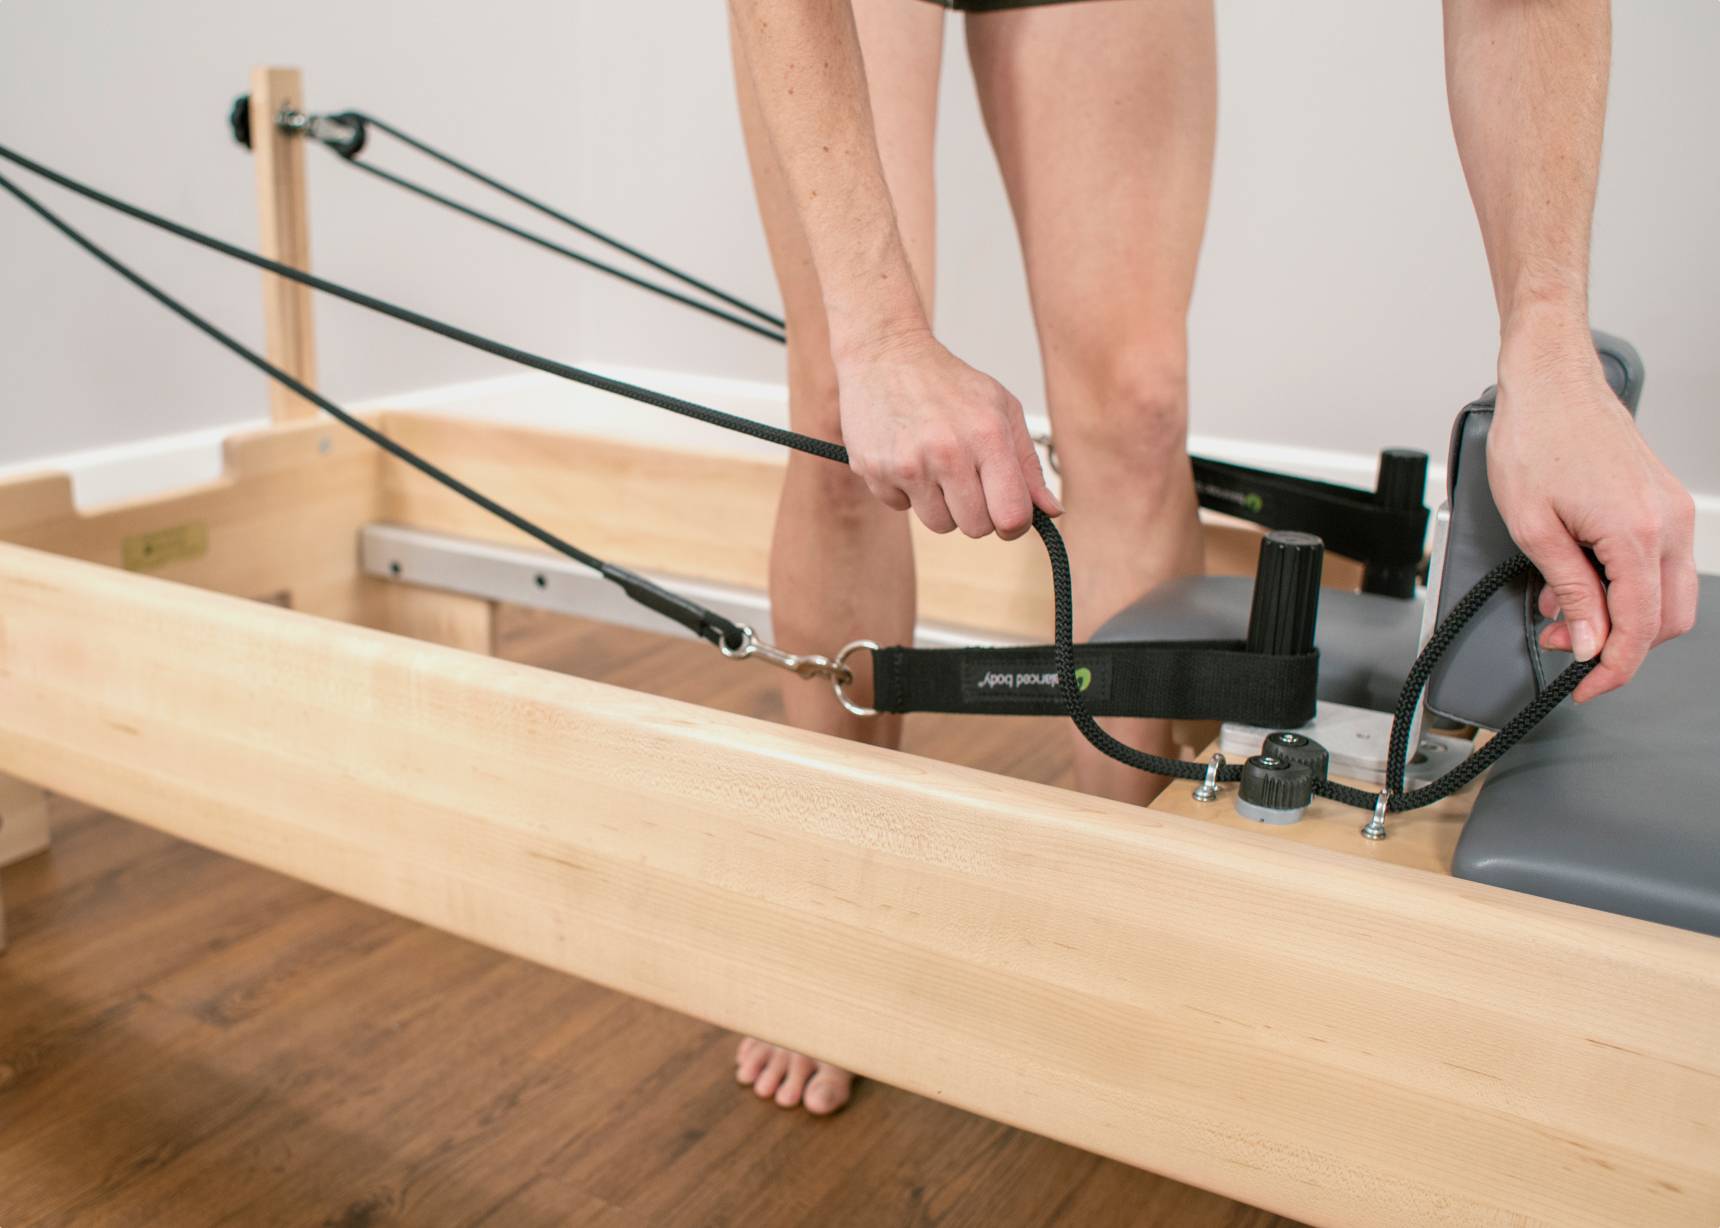 Replacement Reformer Ropes in-use close-up photo